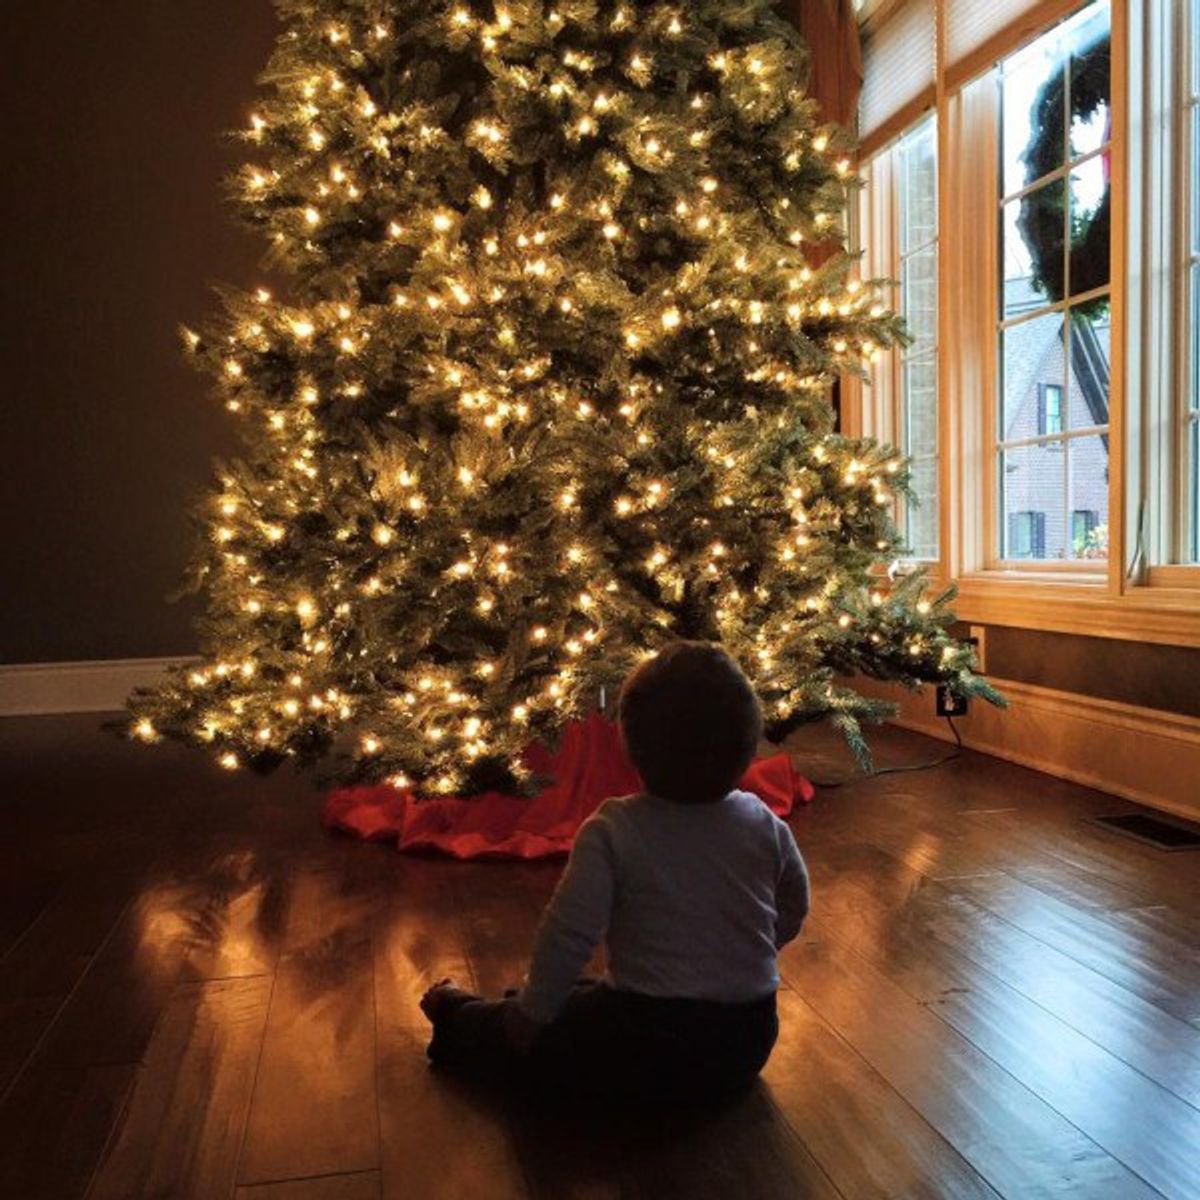 An Open Letter To Those Who Dread Coming Home For The Holidays